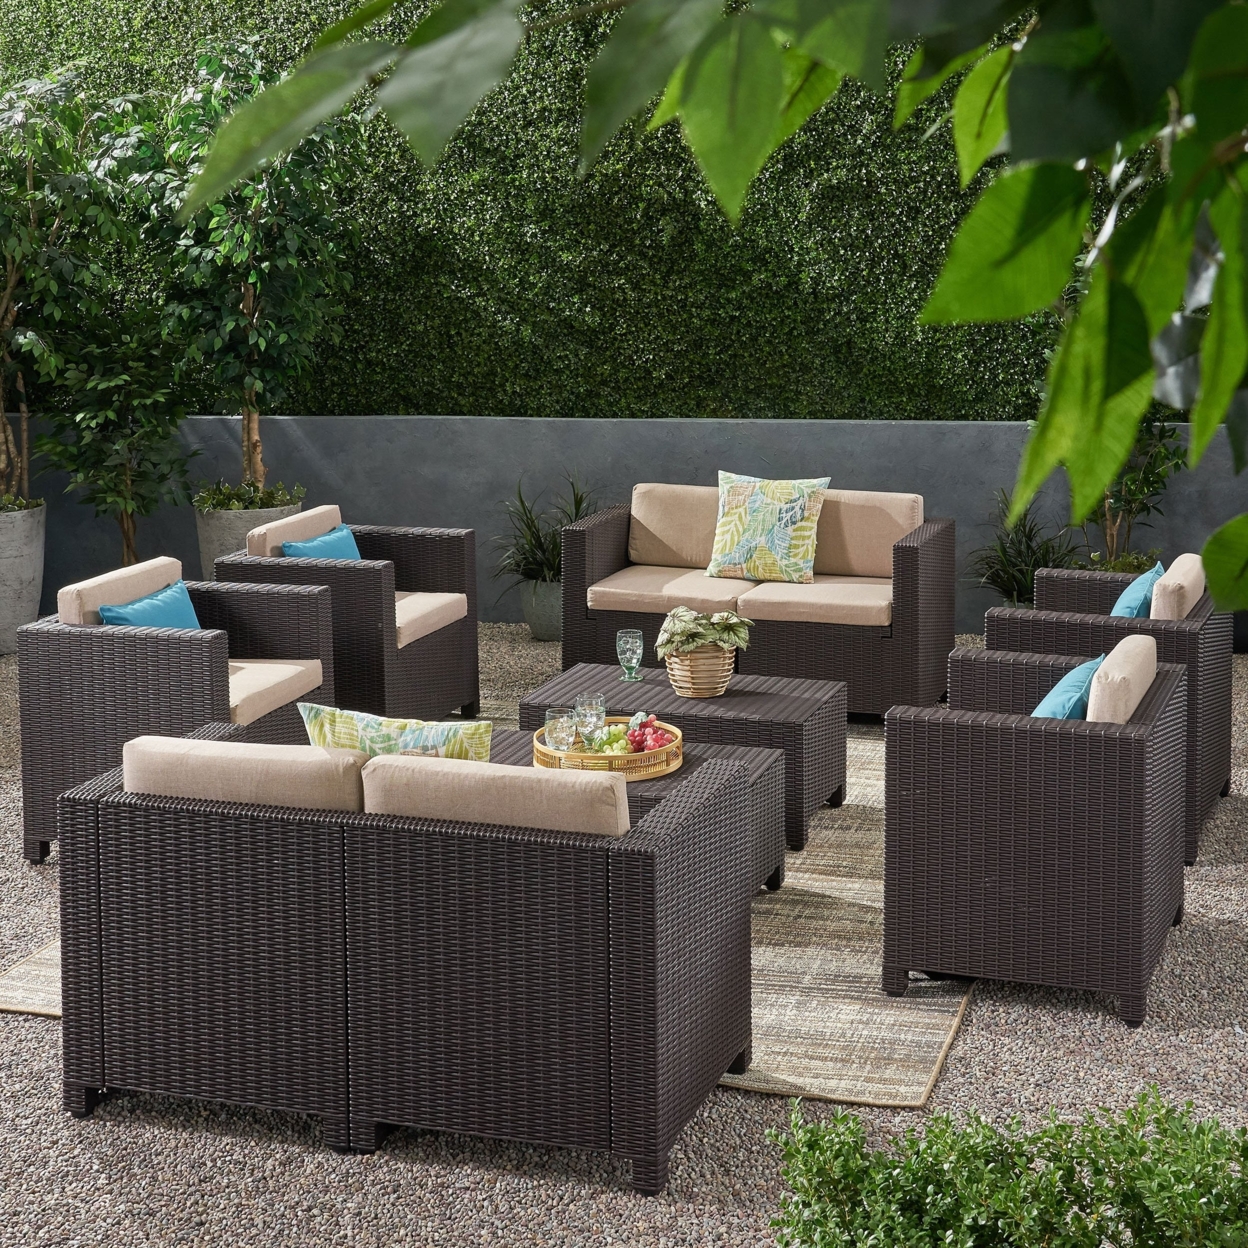 Farirra Outdoor Faux Wicker 8 Seater Chat Set With Cushions - Dark Brown/beige